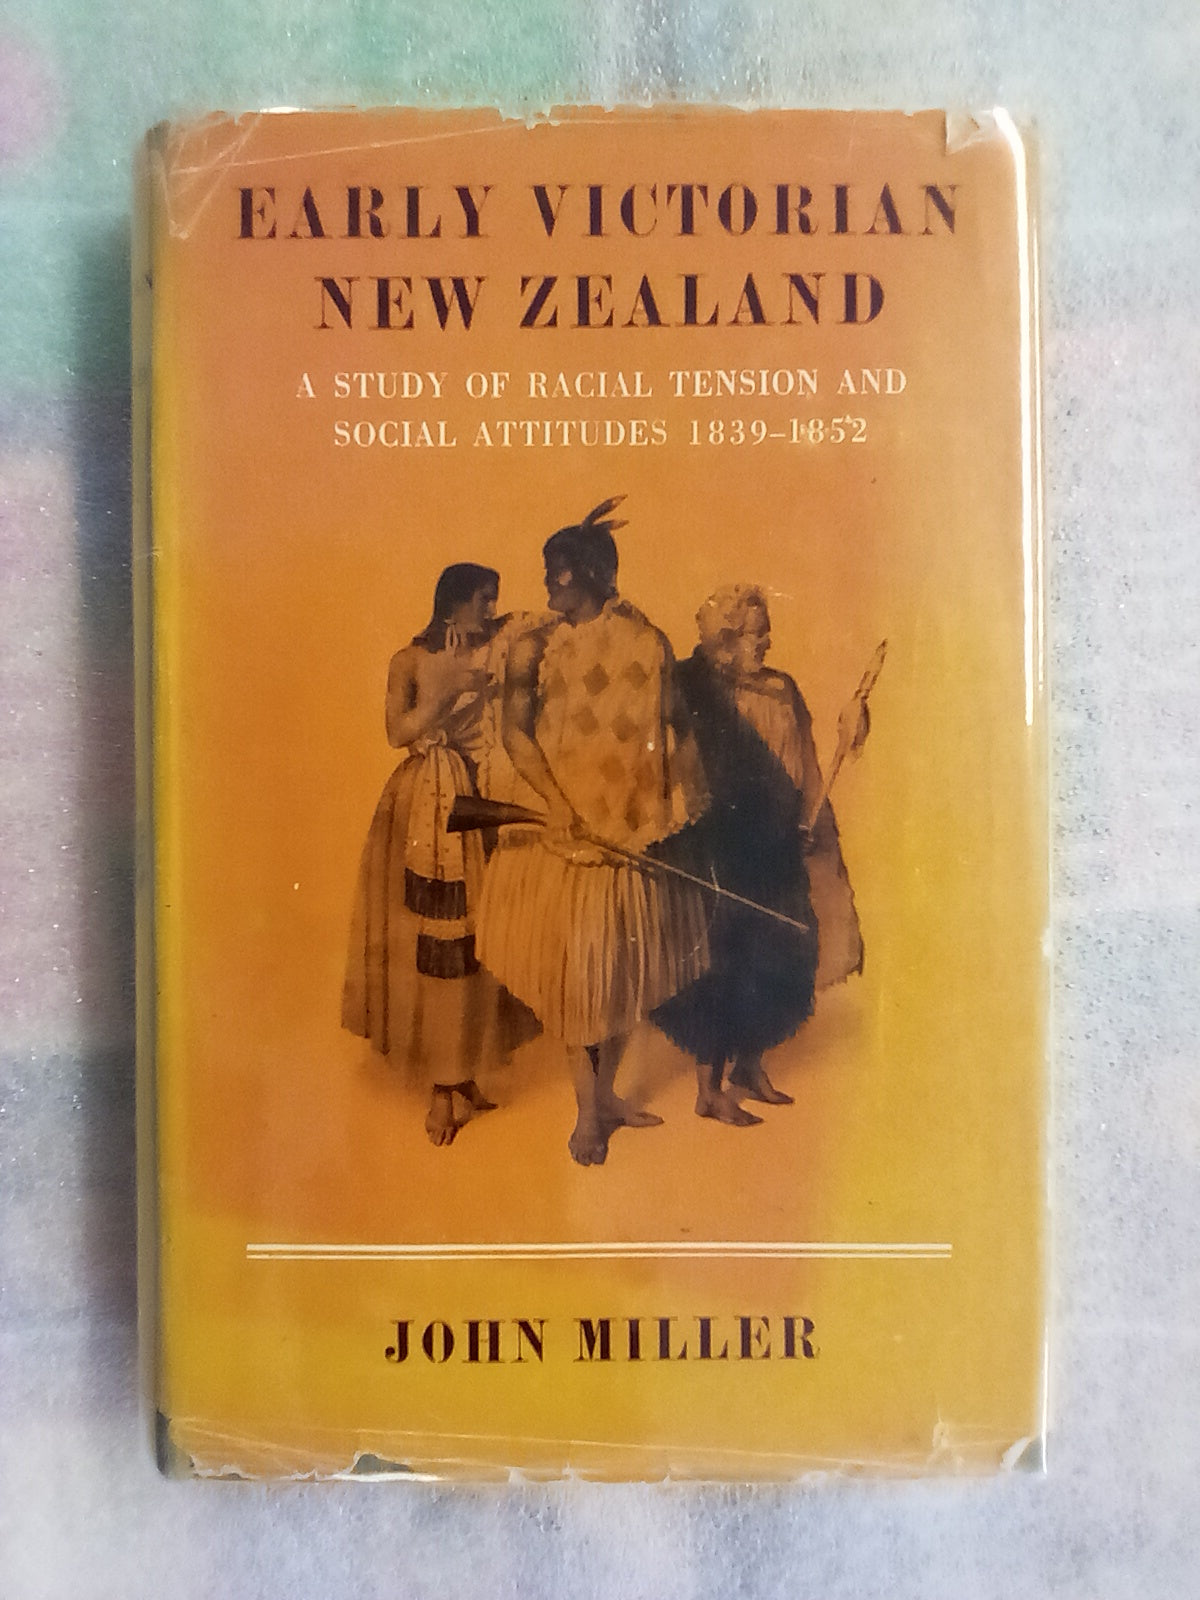 Early Victorian New Zealand - A Study of Racial Tension & Social Attitudes 1839-1852